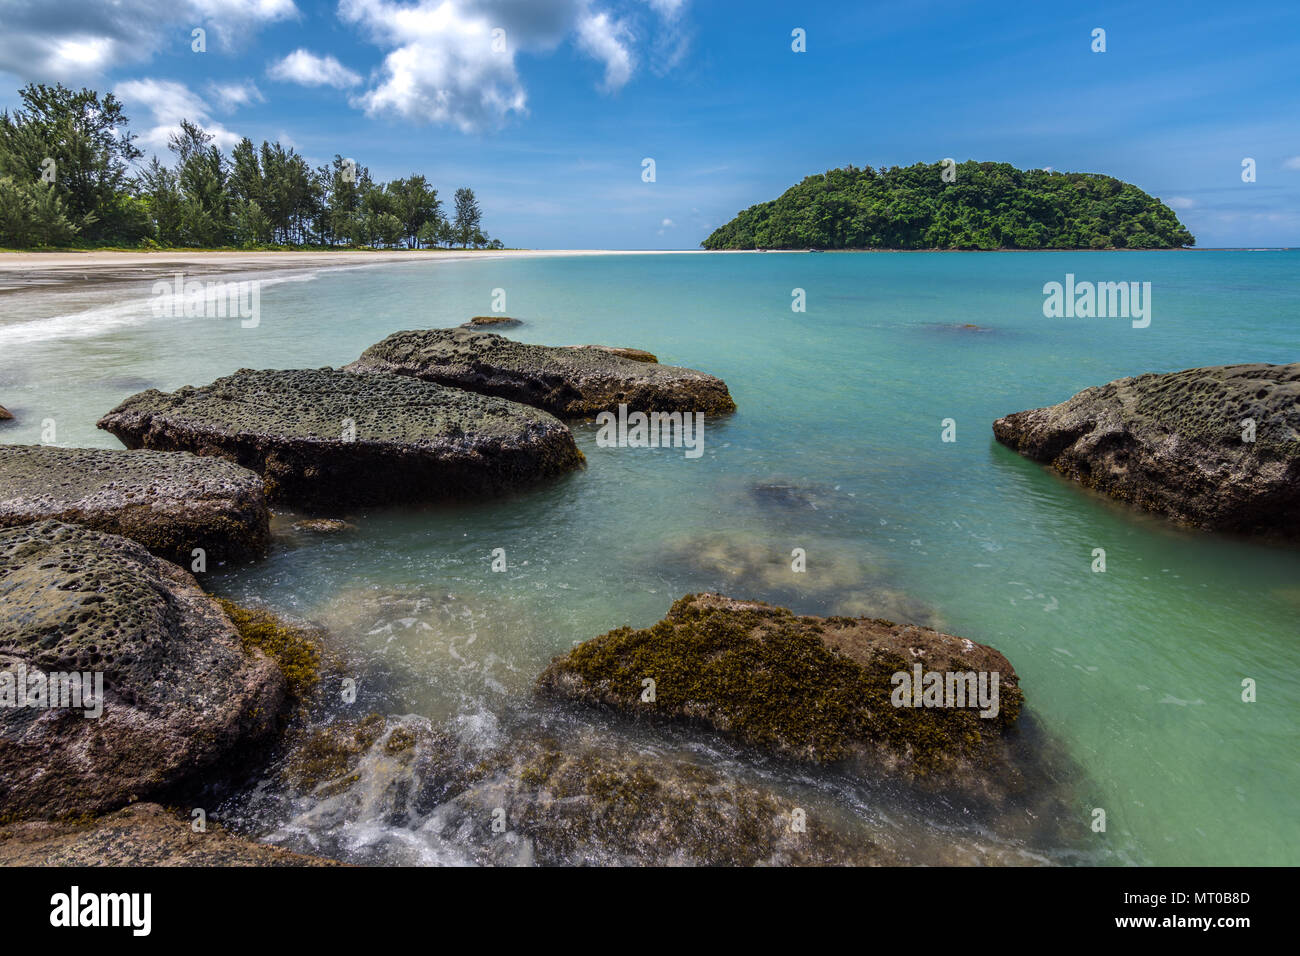 A beautiful setting of a small island with a walkable sand band in the region of the Tip of Borneo, Malaysia. Stock Photo